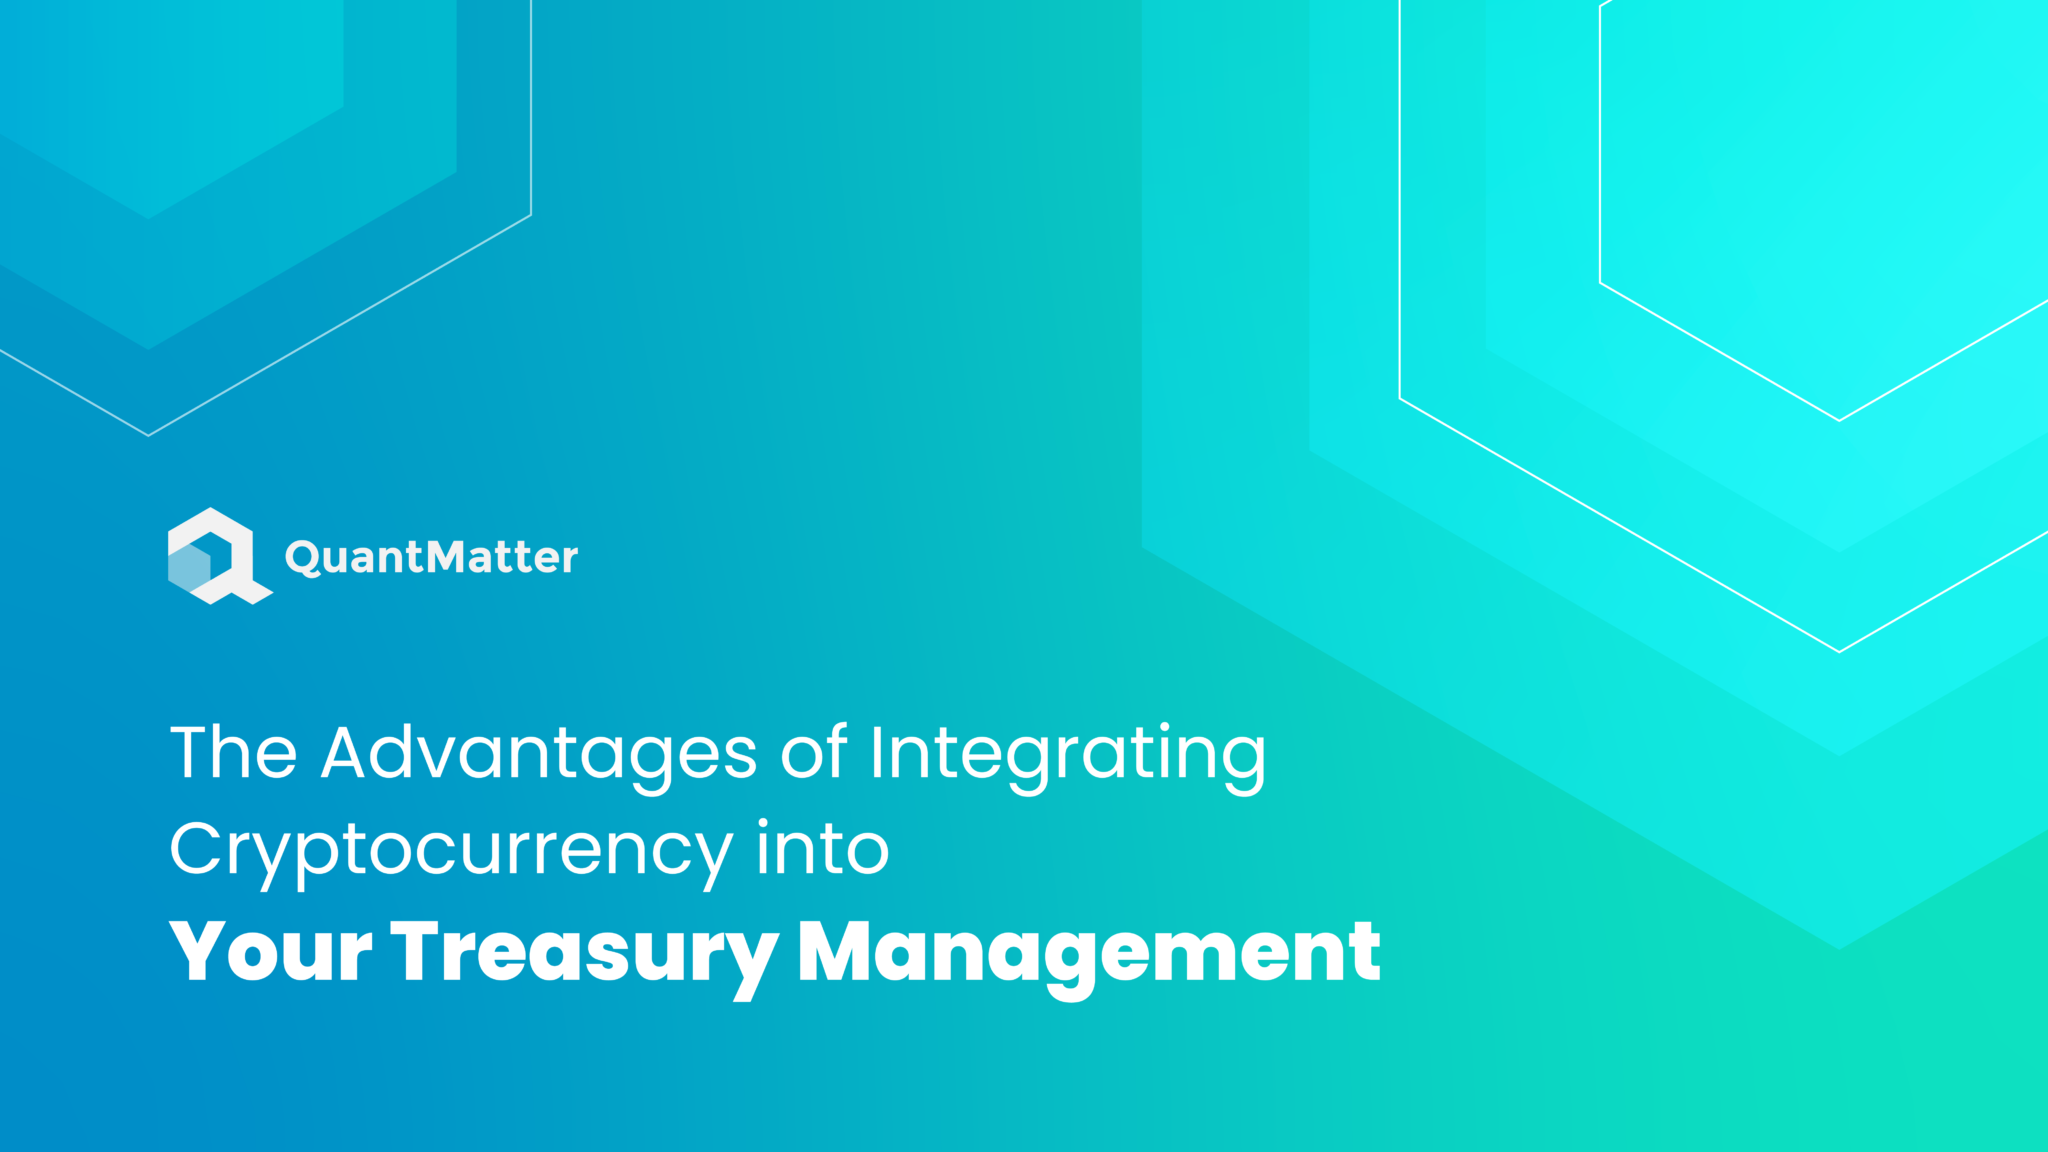 The Advantages of Integrating Cryptocurrency into Your Treasury Management